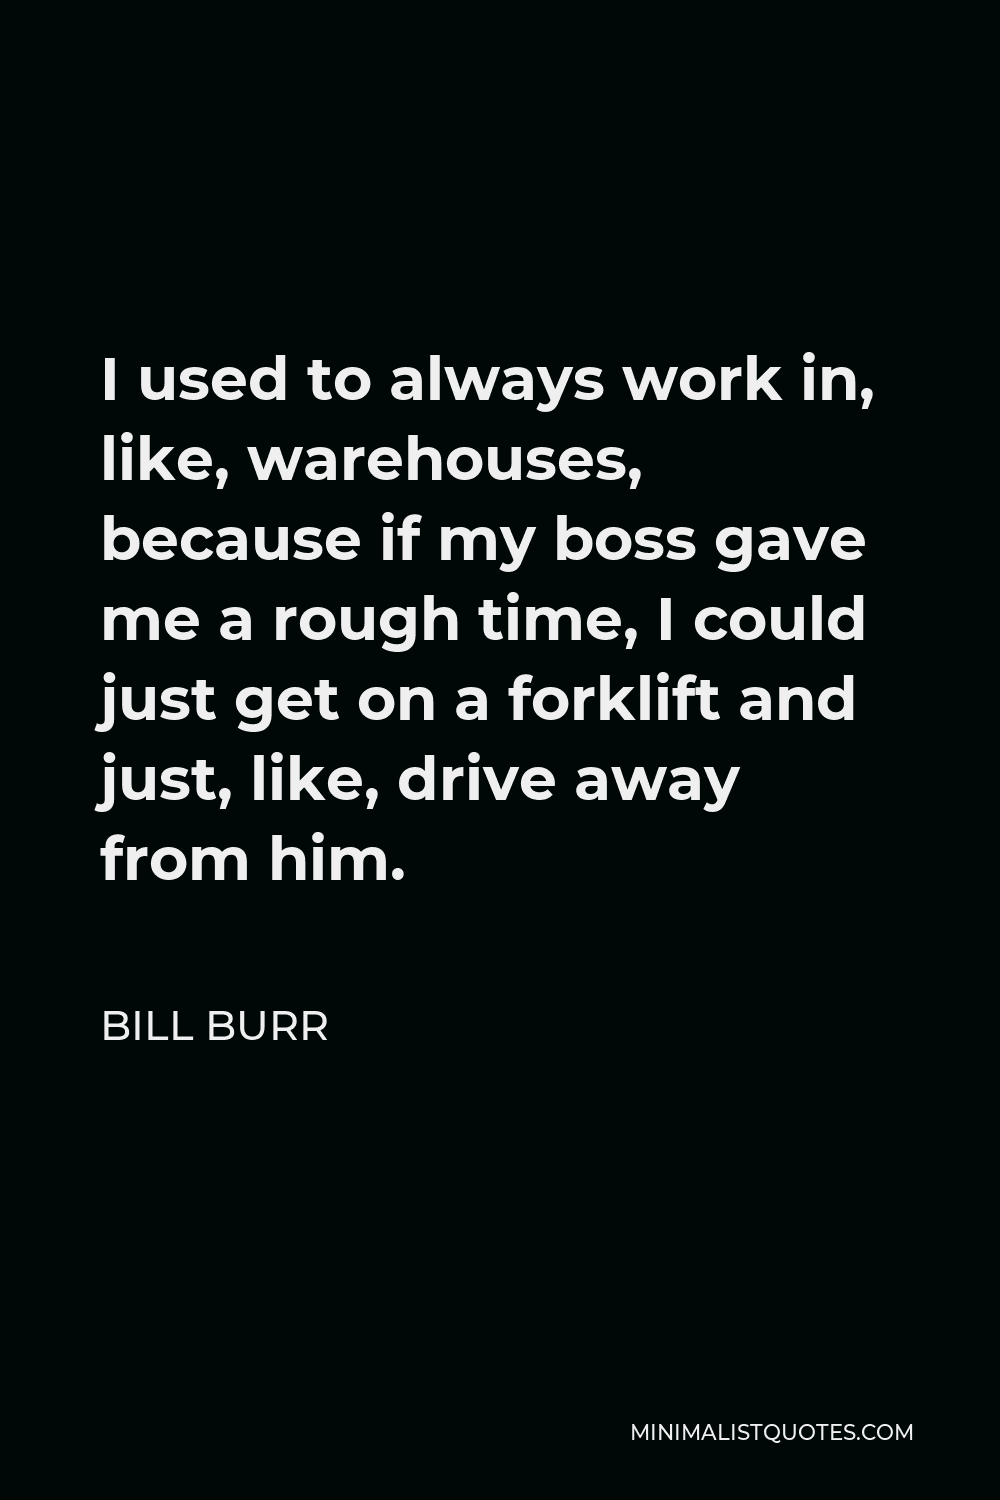 Bill Burr Quote - I used to always work in, like, warehouses, because if my boss gave me a rough time, I could just get on a forklift and just, like, drive away from him.